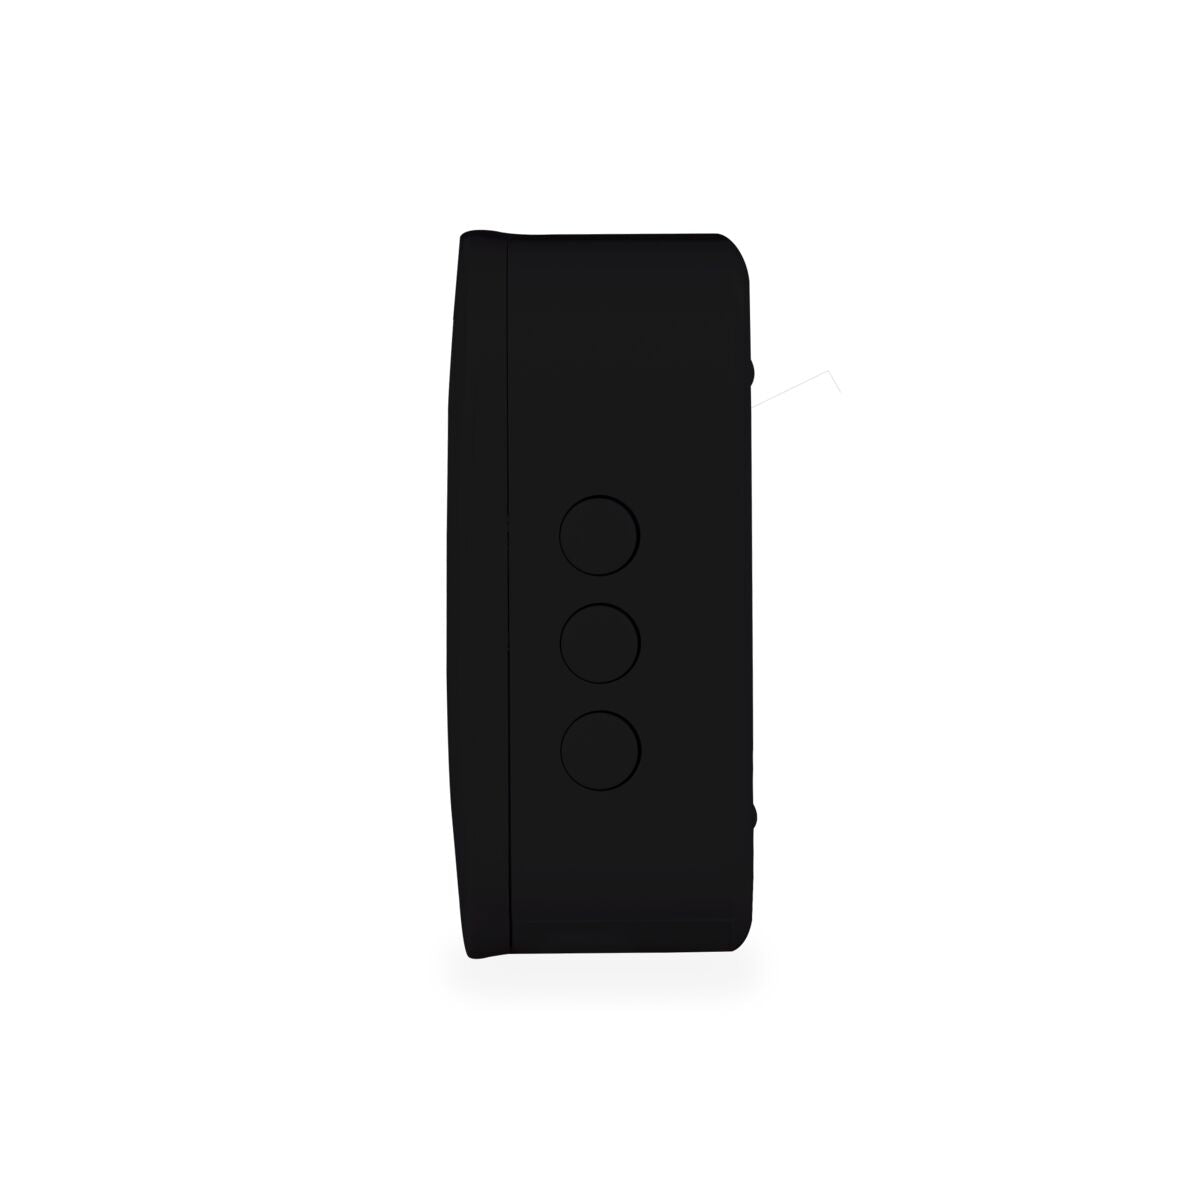 Bell ME BLK - Wireless chime - Chime for Buzz LO - 80m